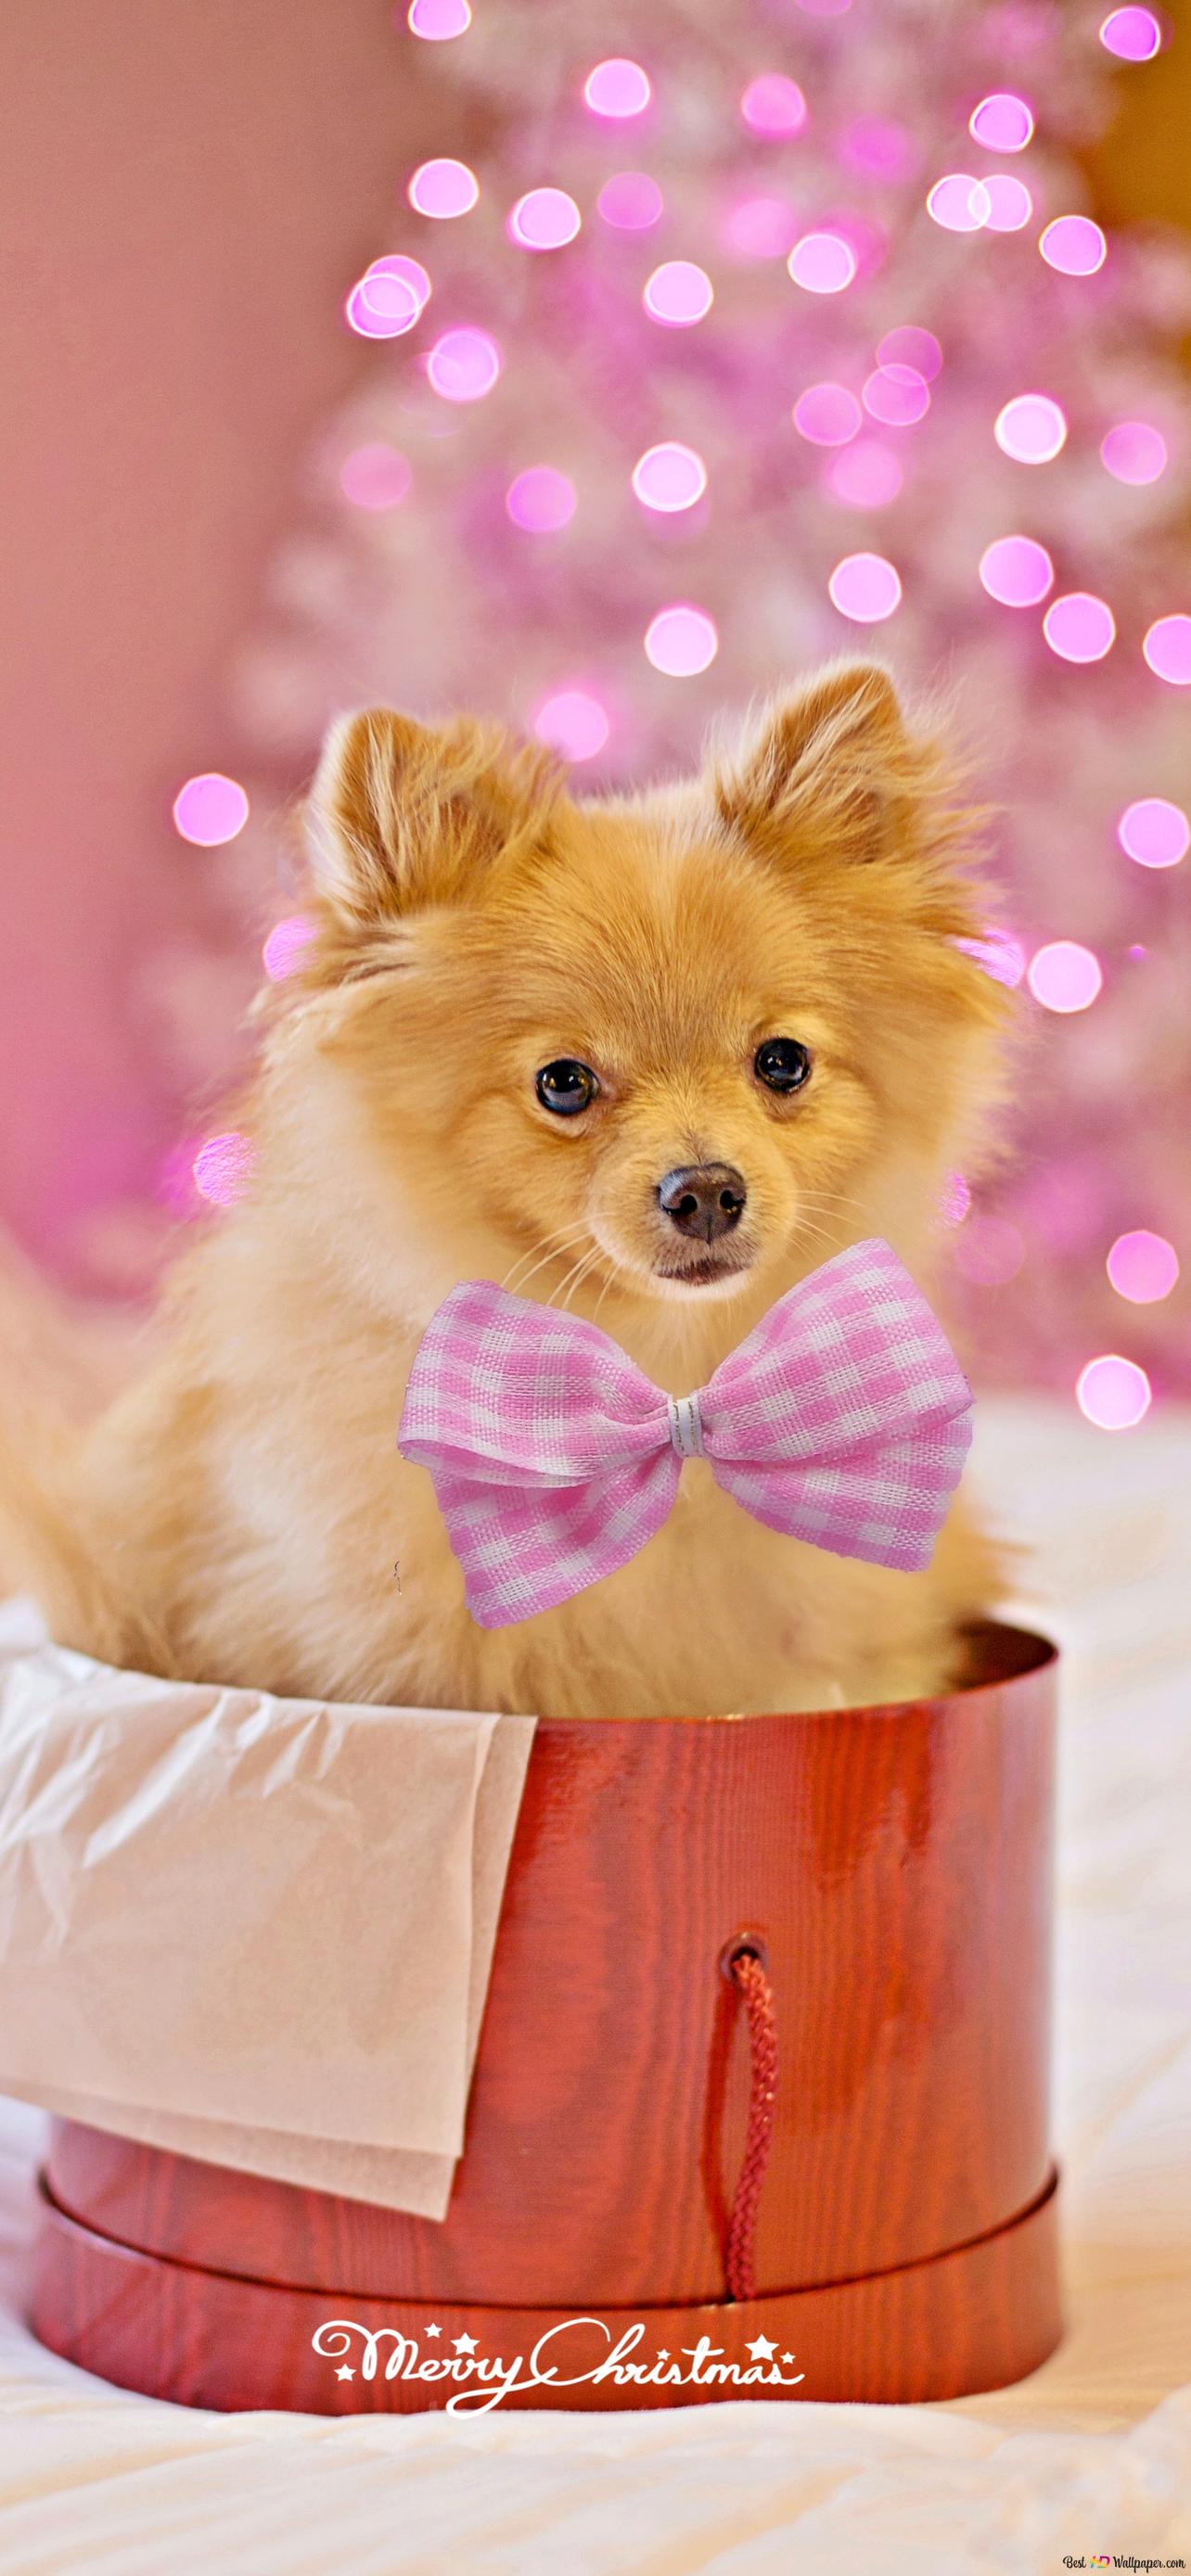 Cutest pet puppy as a gift on holidays with pink lights as background 2K wallpaper download